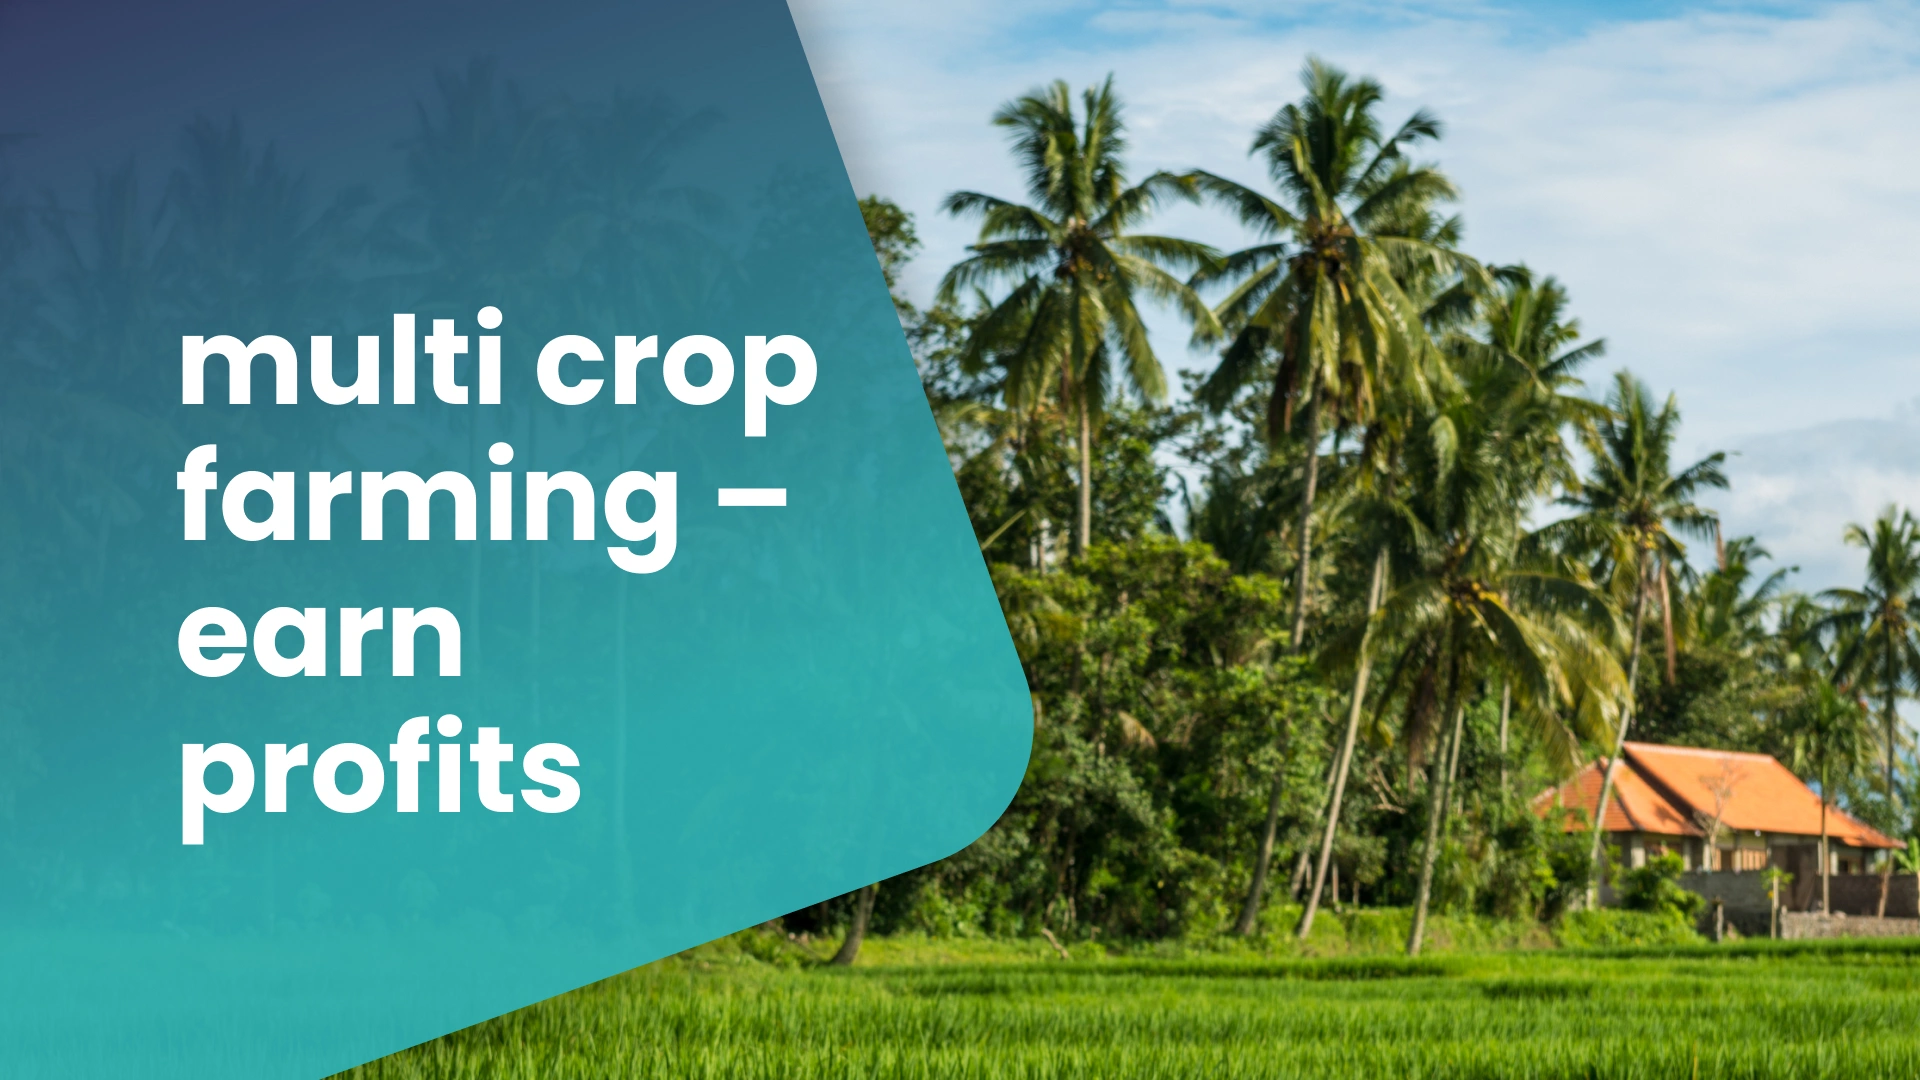 Course Trailer: Multi-Crop Farming Course - Earn daily from your farm!. Watch to know more.